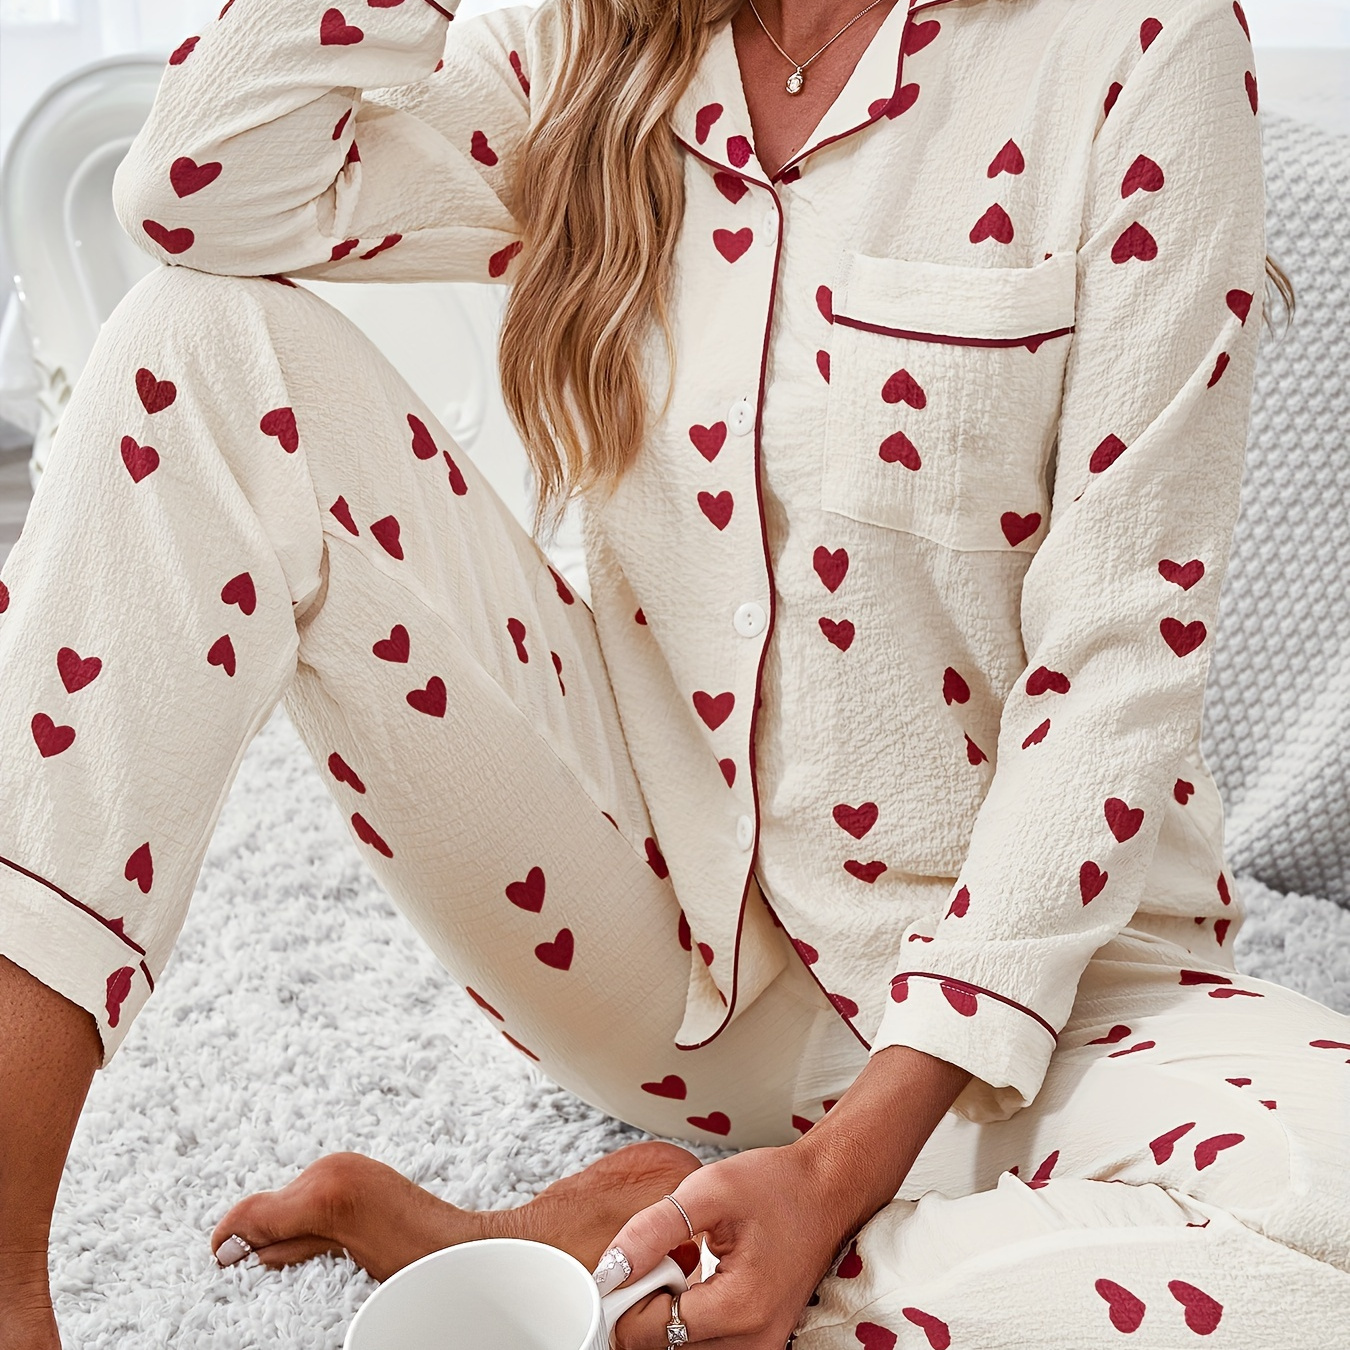 

Women's Heart Print Textured Casual Pajama Set, Long Sleeve Buttons Lapel Top & Pants, Comfortable Relaxed Fit For Fall & Winter